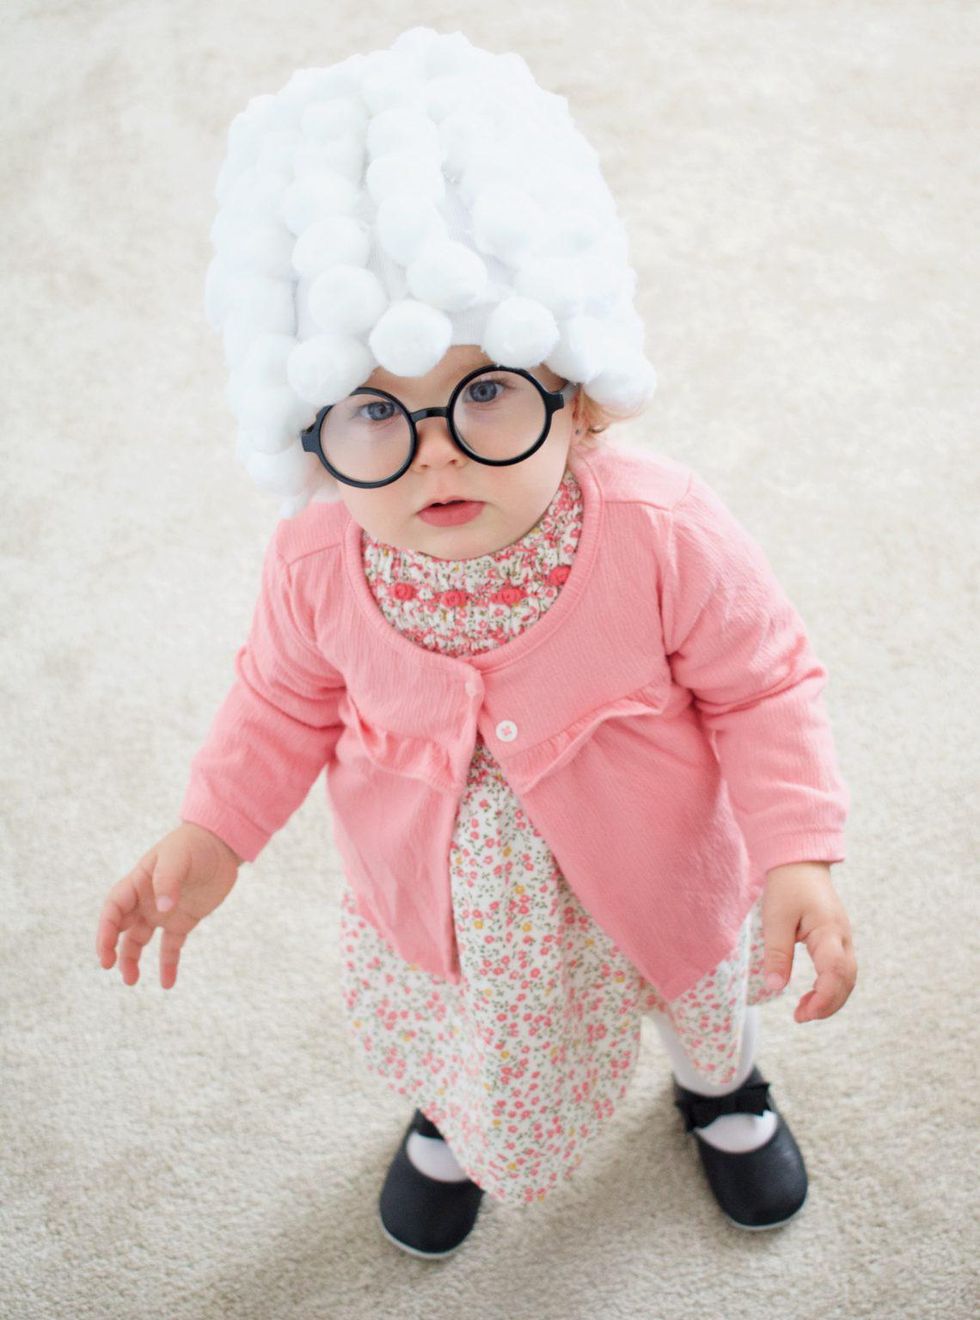 https://www.mother.ly/wp-content/uploads/legacy-images/25-adorable-costumes-for-your-babys-first-halloween-5.jpg